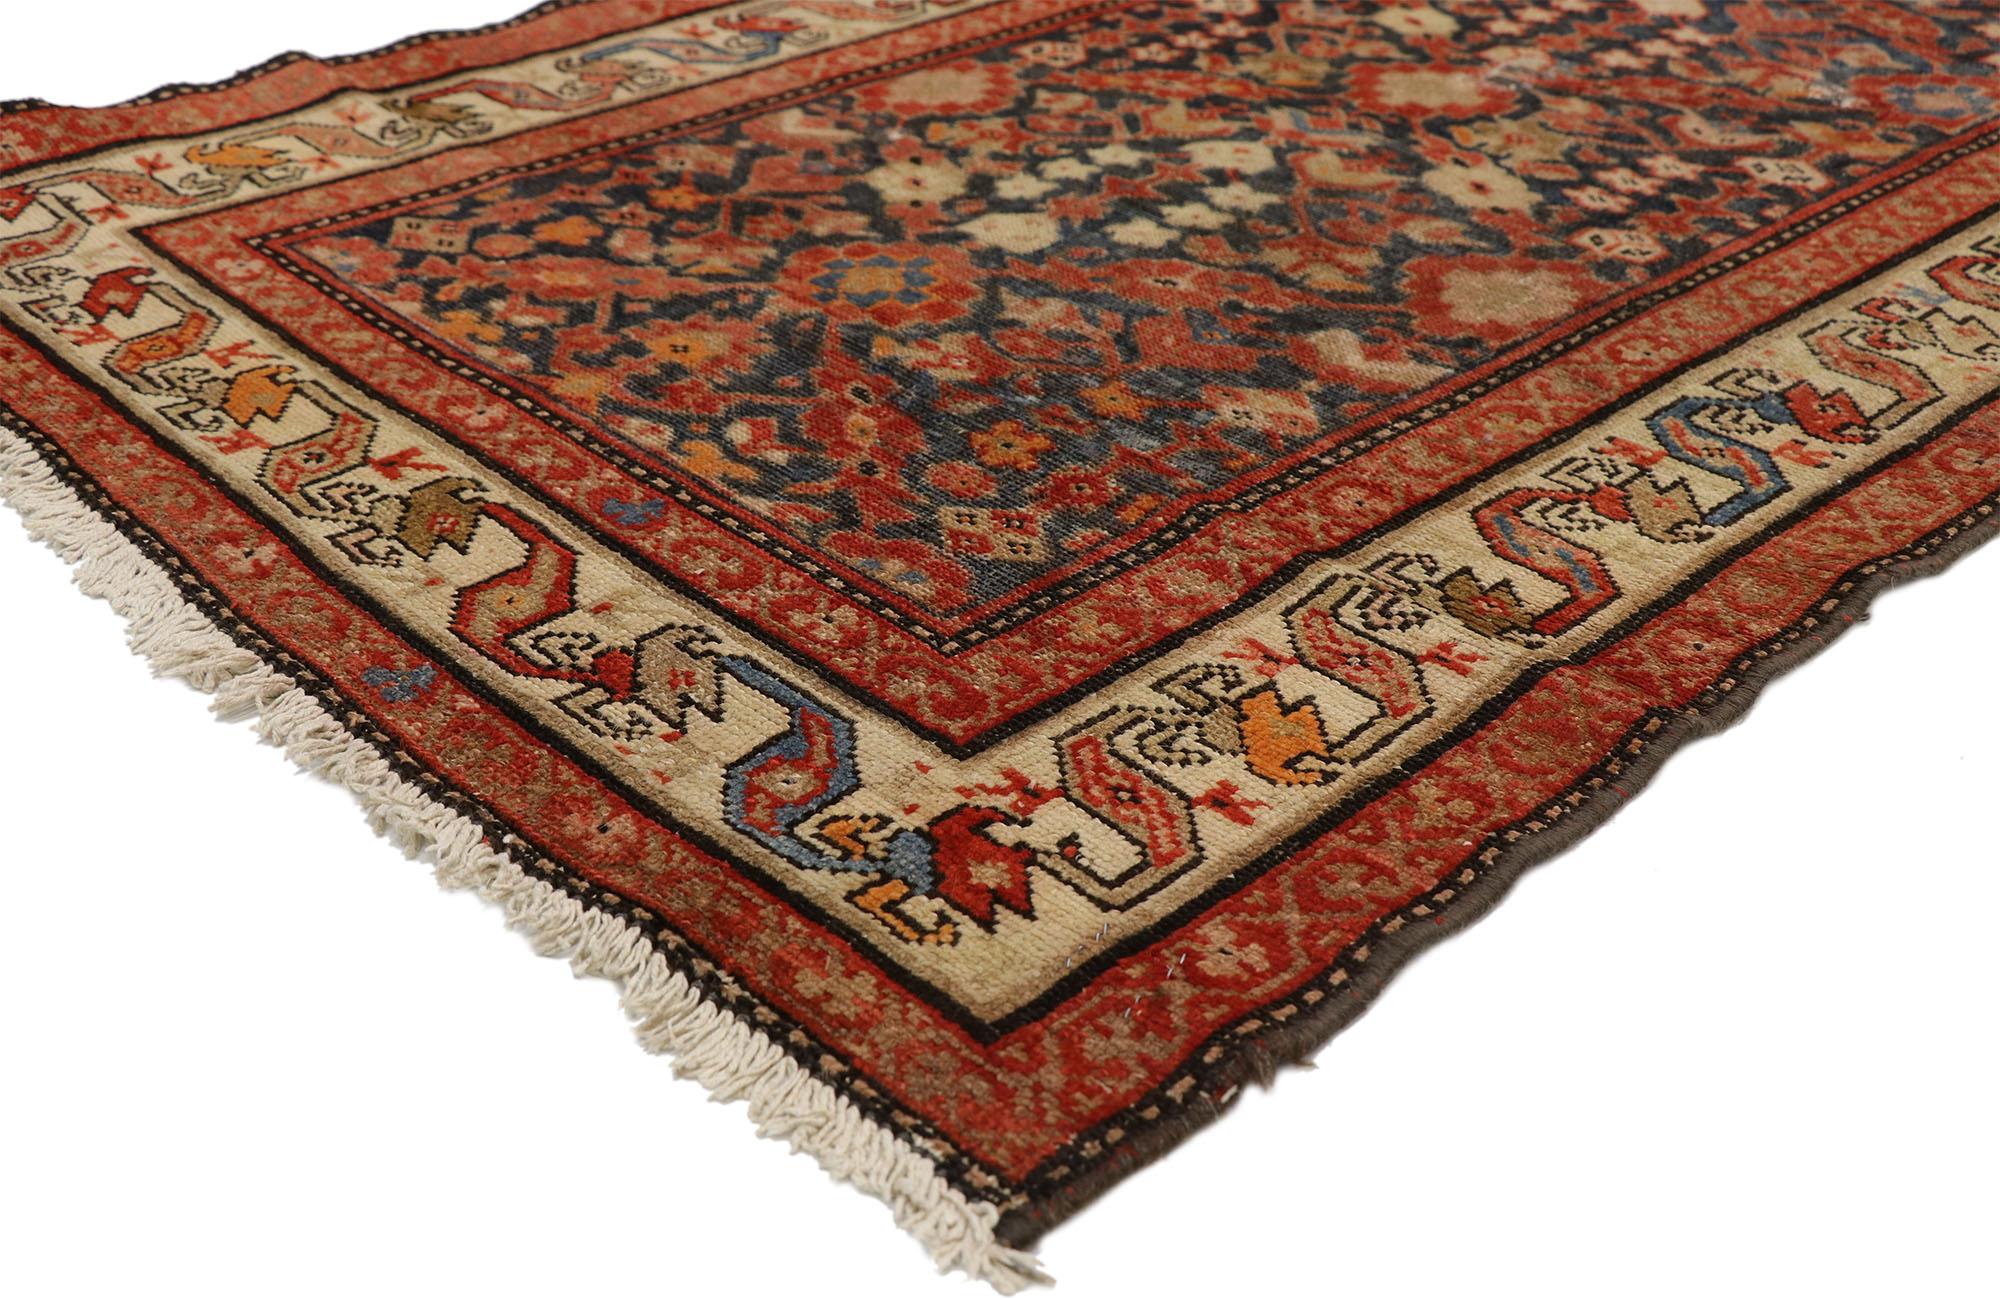 74949 Vintage Persian Malayer Runner with Guli Hinnai Flower and Mina Khani Design. This hand knotted wool antique Persian Malayer runner features a lively all-over floral lattice pattern composed of Mina Khani design and Guli Henna which is the